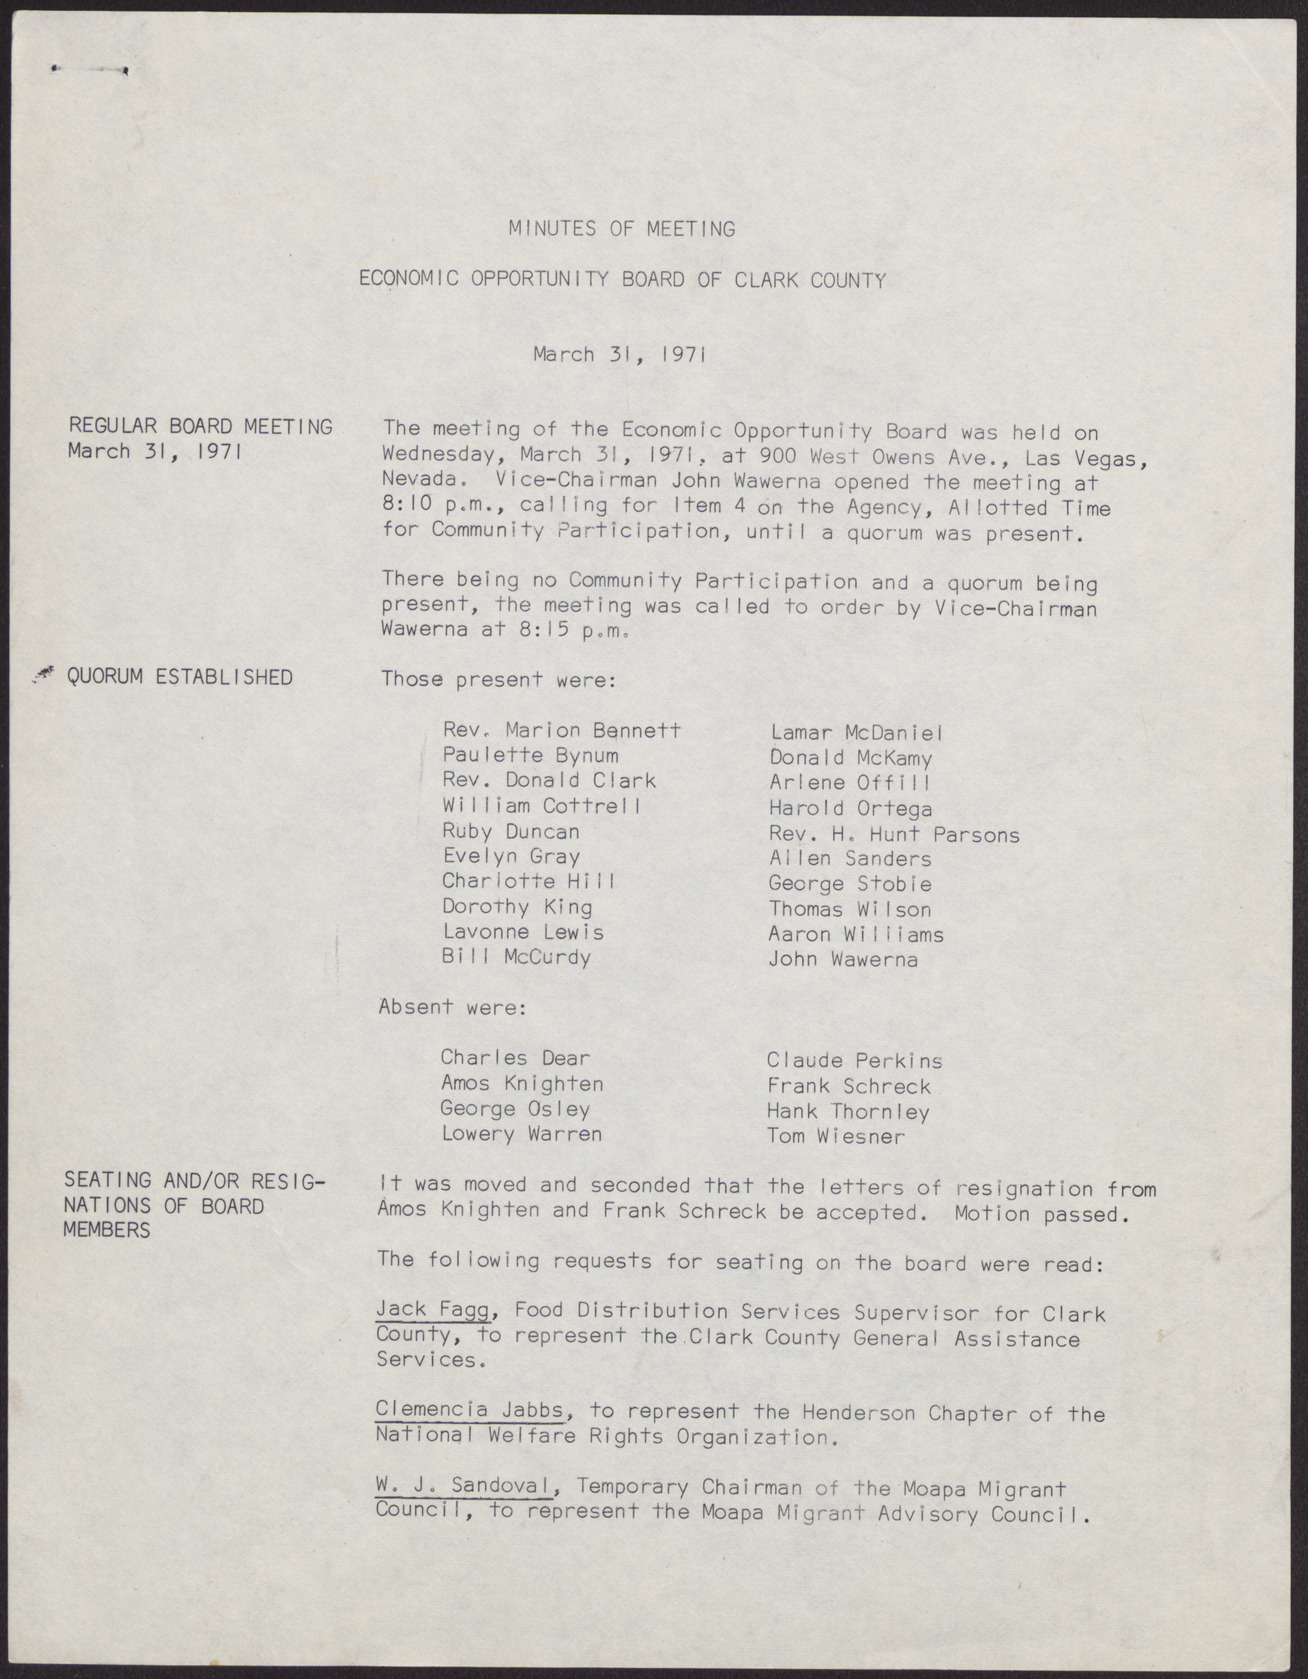 Minutes from Economic Opportunity Board meeting (9 pages), March 31, 1971